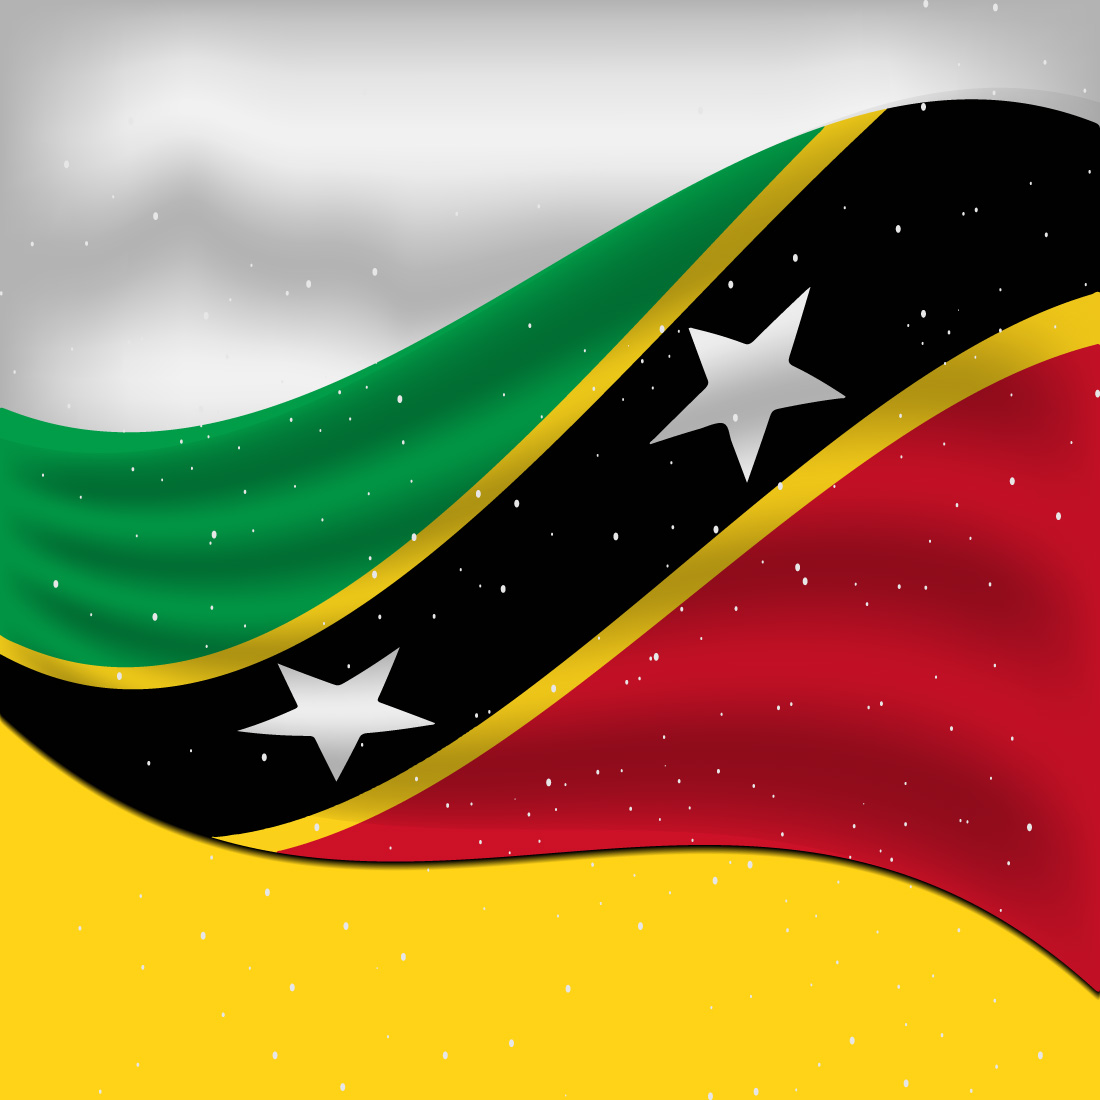 Gorgeous image of the flag of Saint Kitts and Nevis.